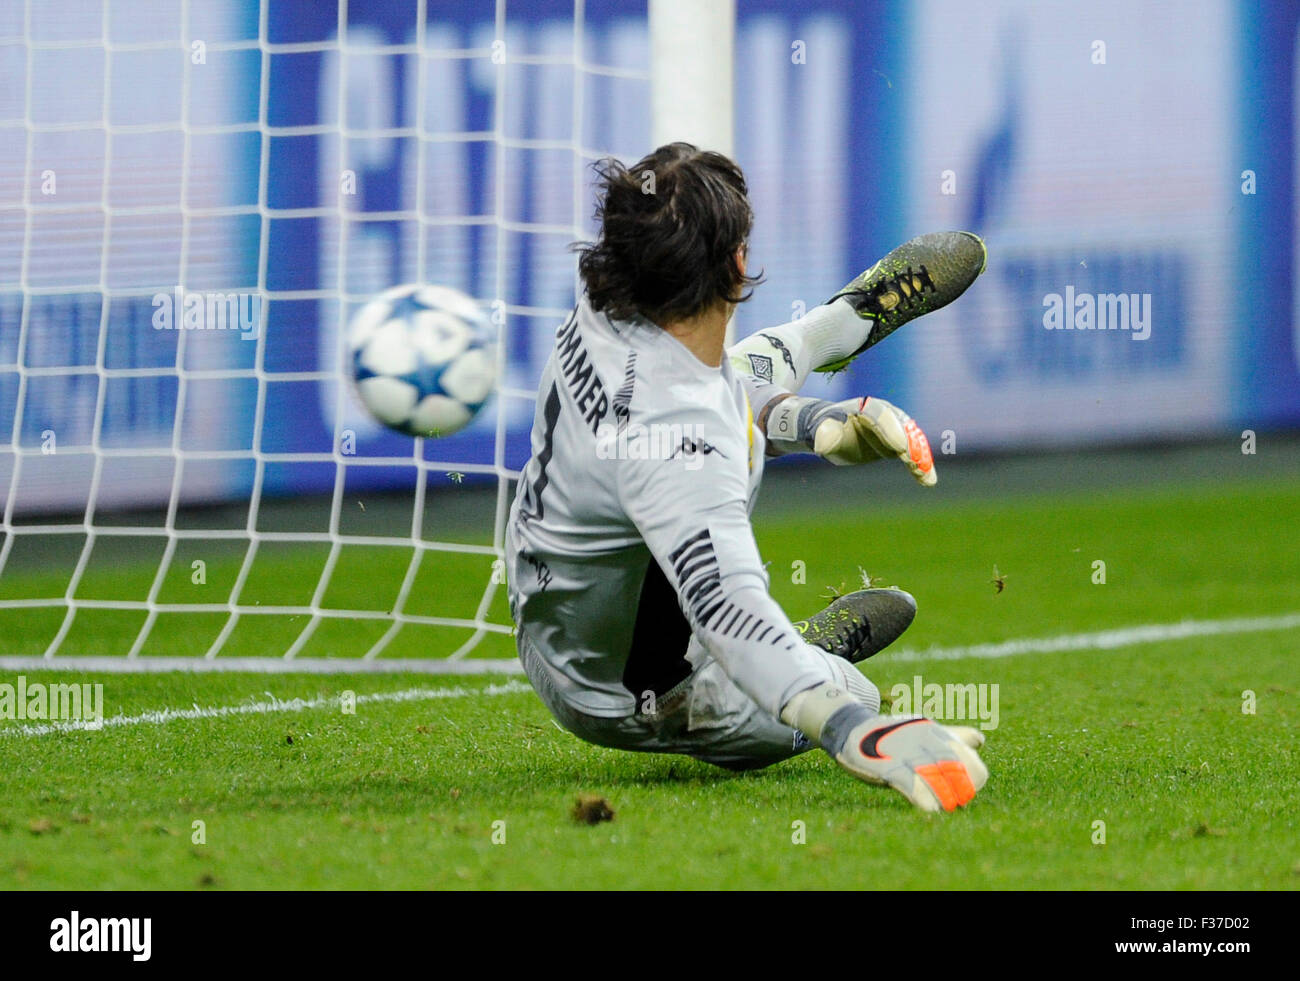 Moenchengladbach, Germany. 30th Sep, 2015. UEFA Champions League, 2015/16, prliminary round, 2nd matchday, Borussia Monchengladbach (Moenchengladbach, Gladbach) vs. Manchester City  1:2 ---- goalkeeper Yann Sommer (Gladbach) watches as the ball enters his goal Credit:  kolvenbach/Alamy Live News Stock Photo